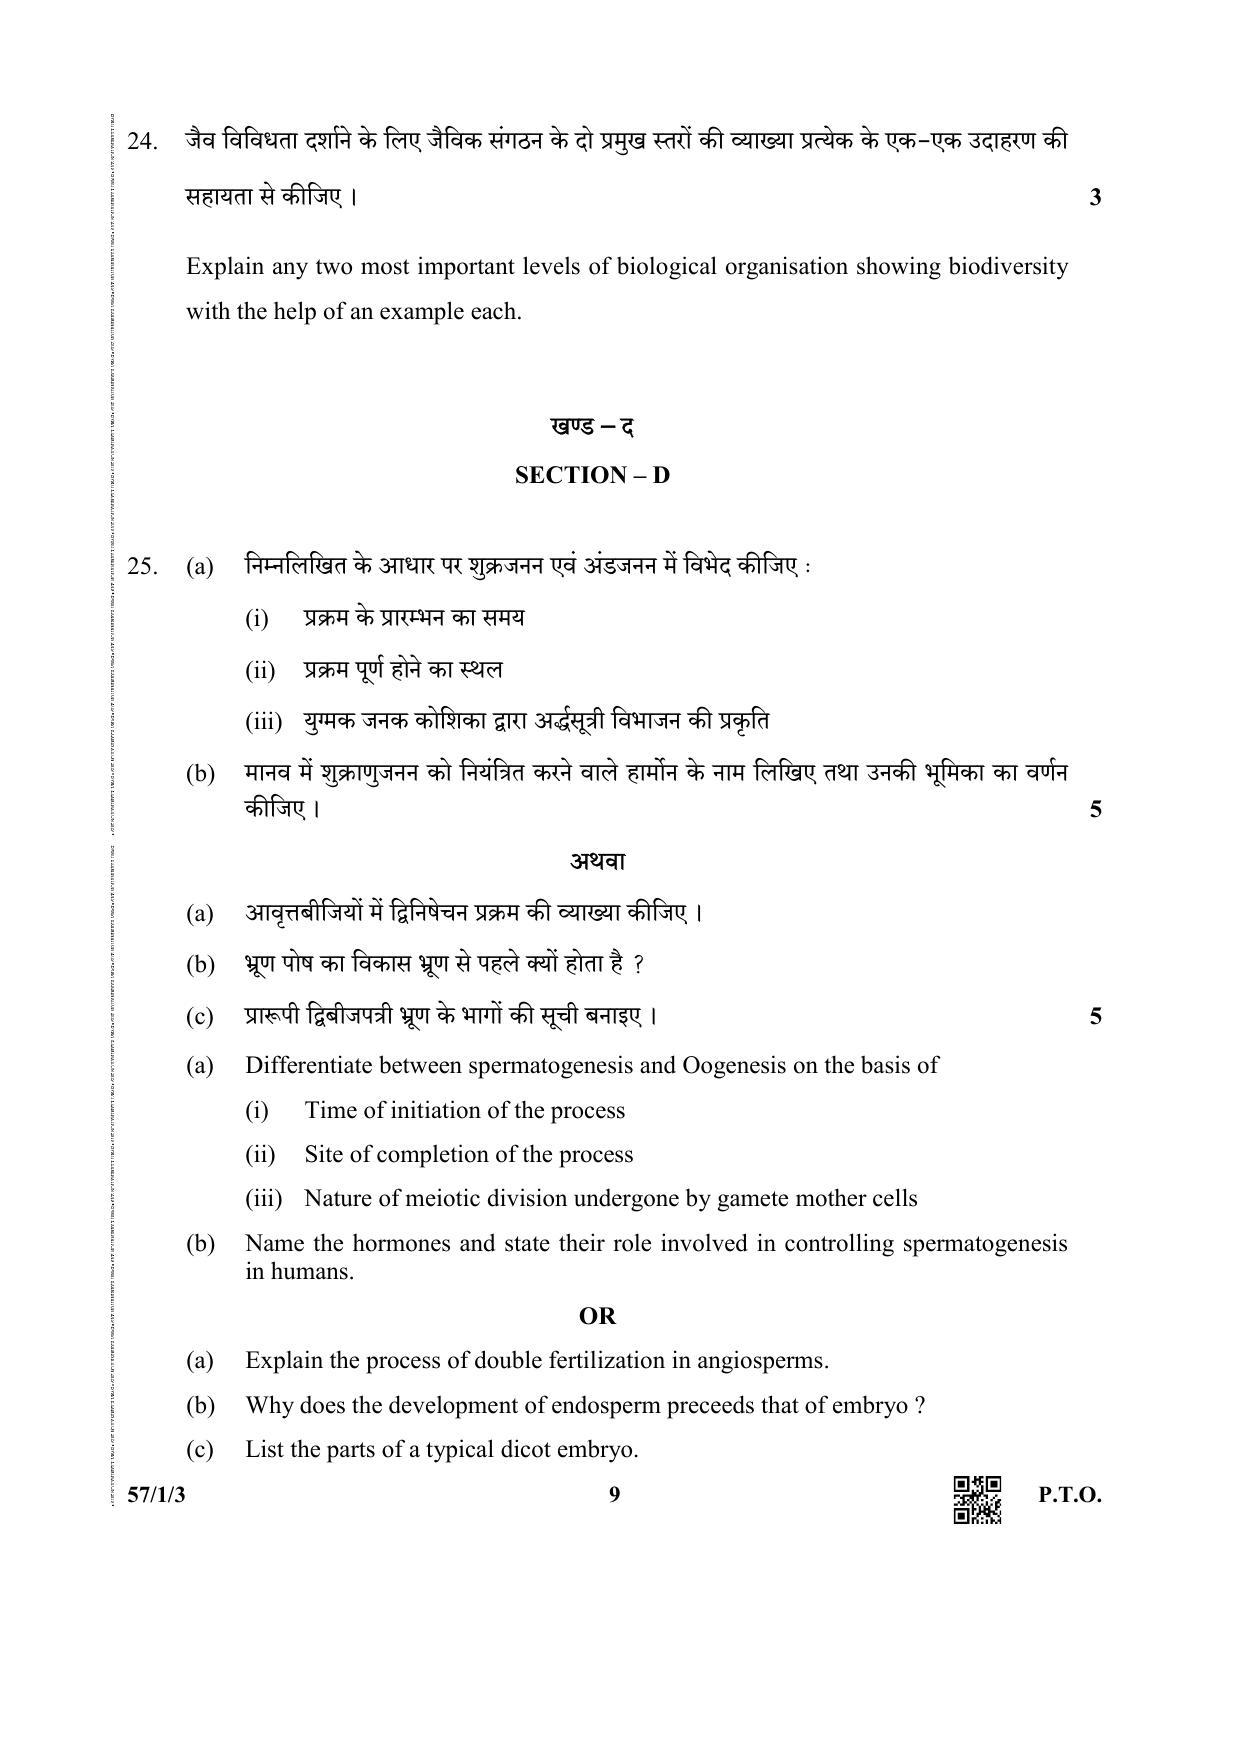 CBSE Class 12 57-3 (Biology) 2019 Question Paper - Page 9